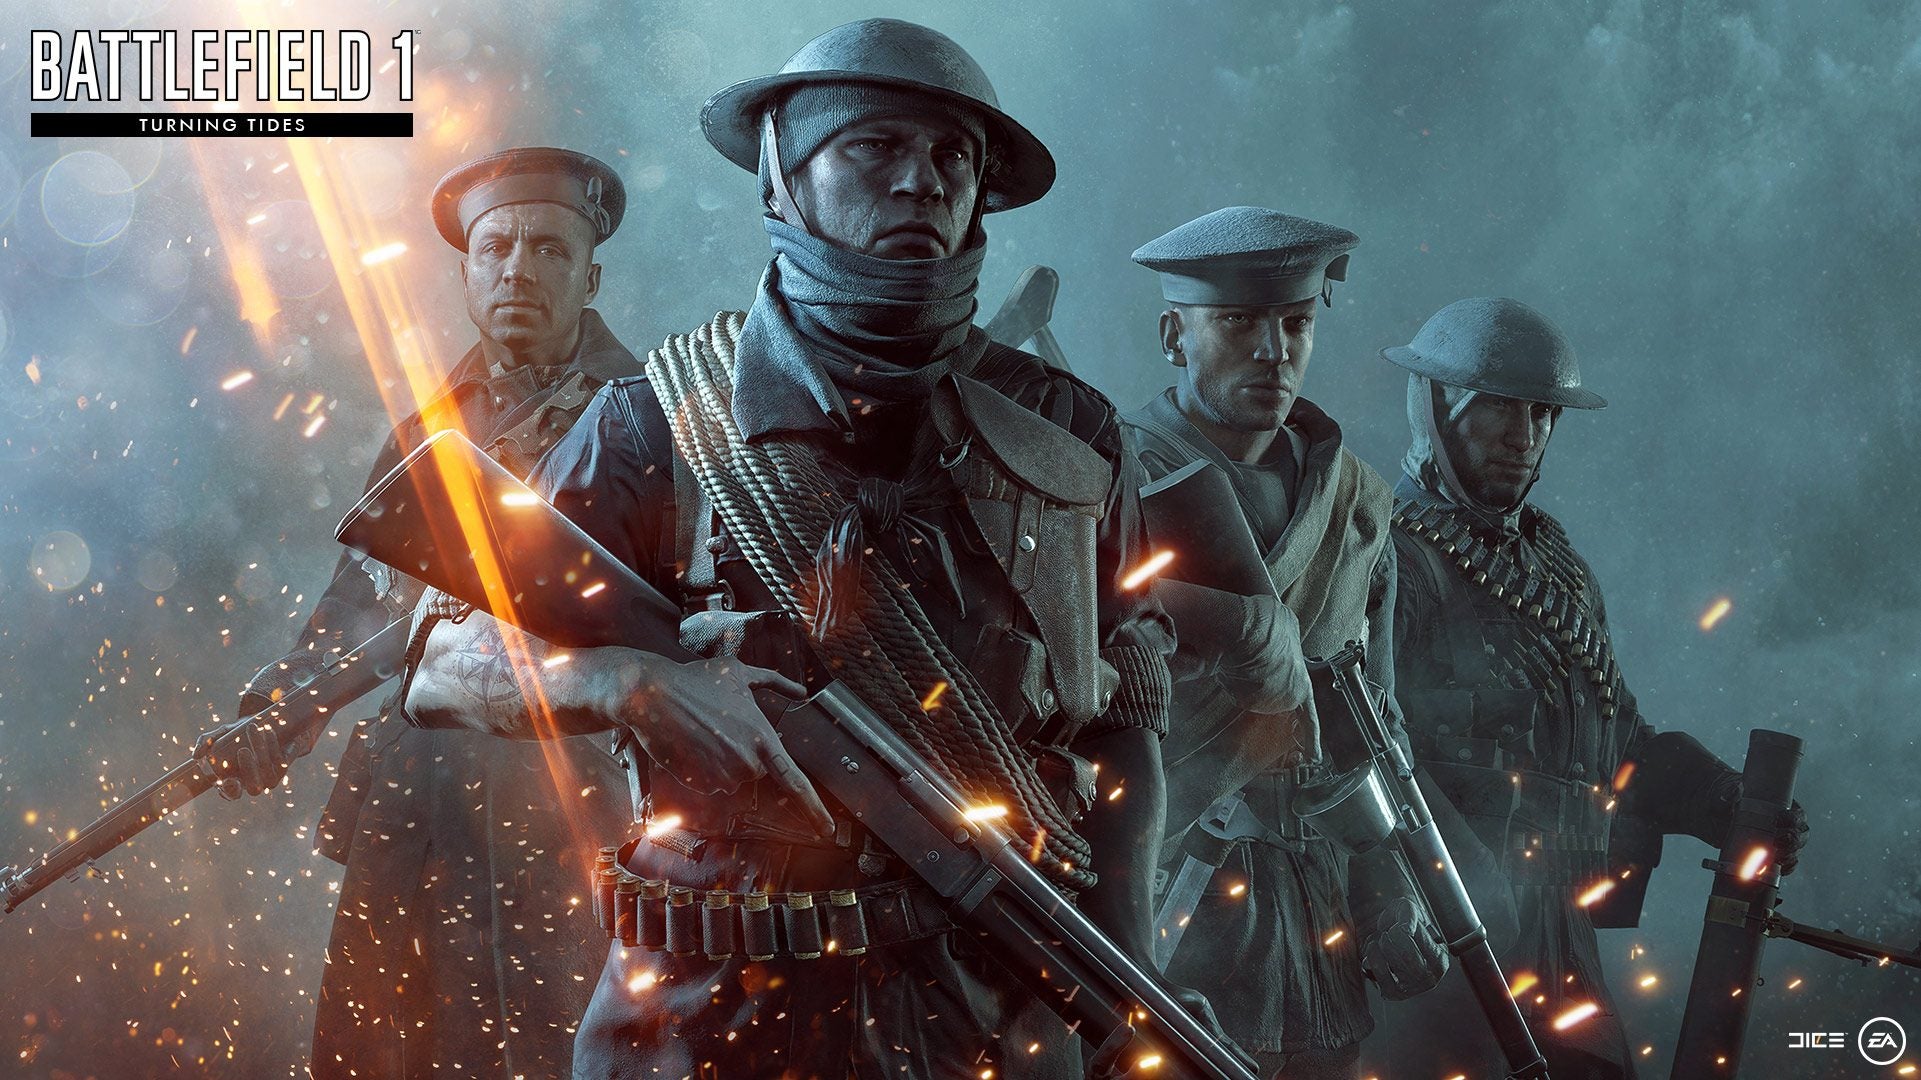 Image for Battlefield 5 reveal appears to be on May 23 according to this latest Battlefield 1 easter egg